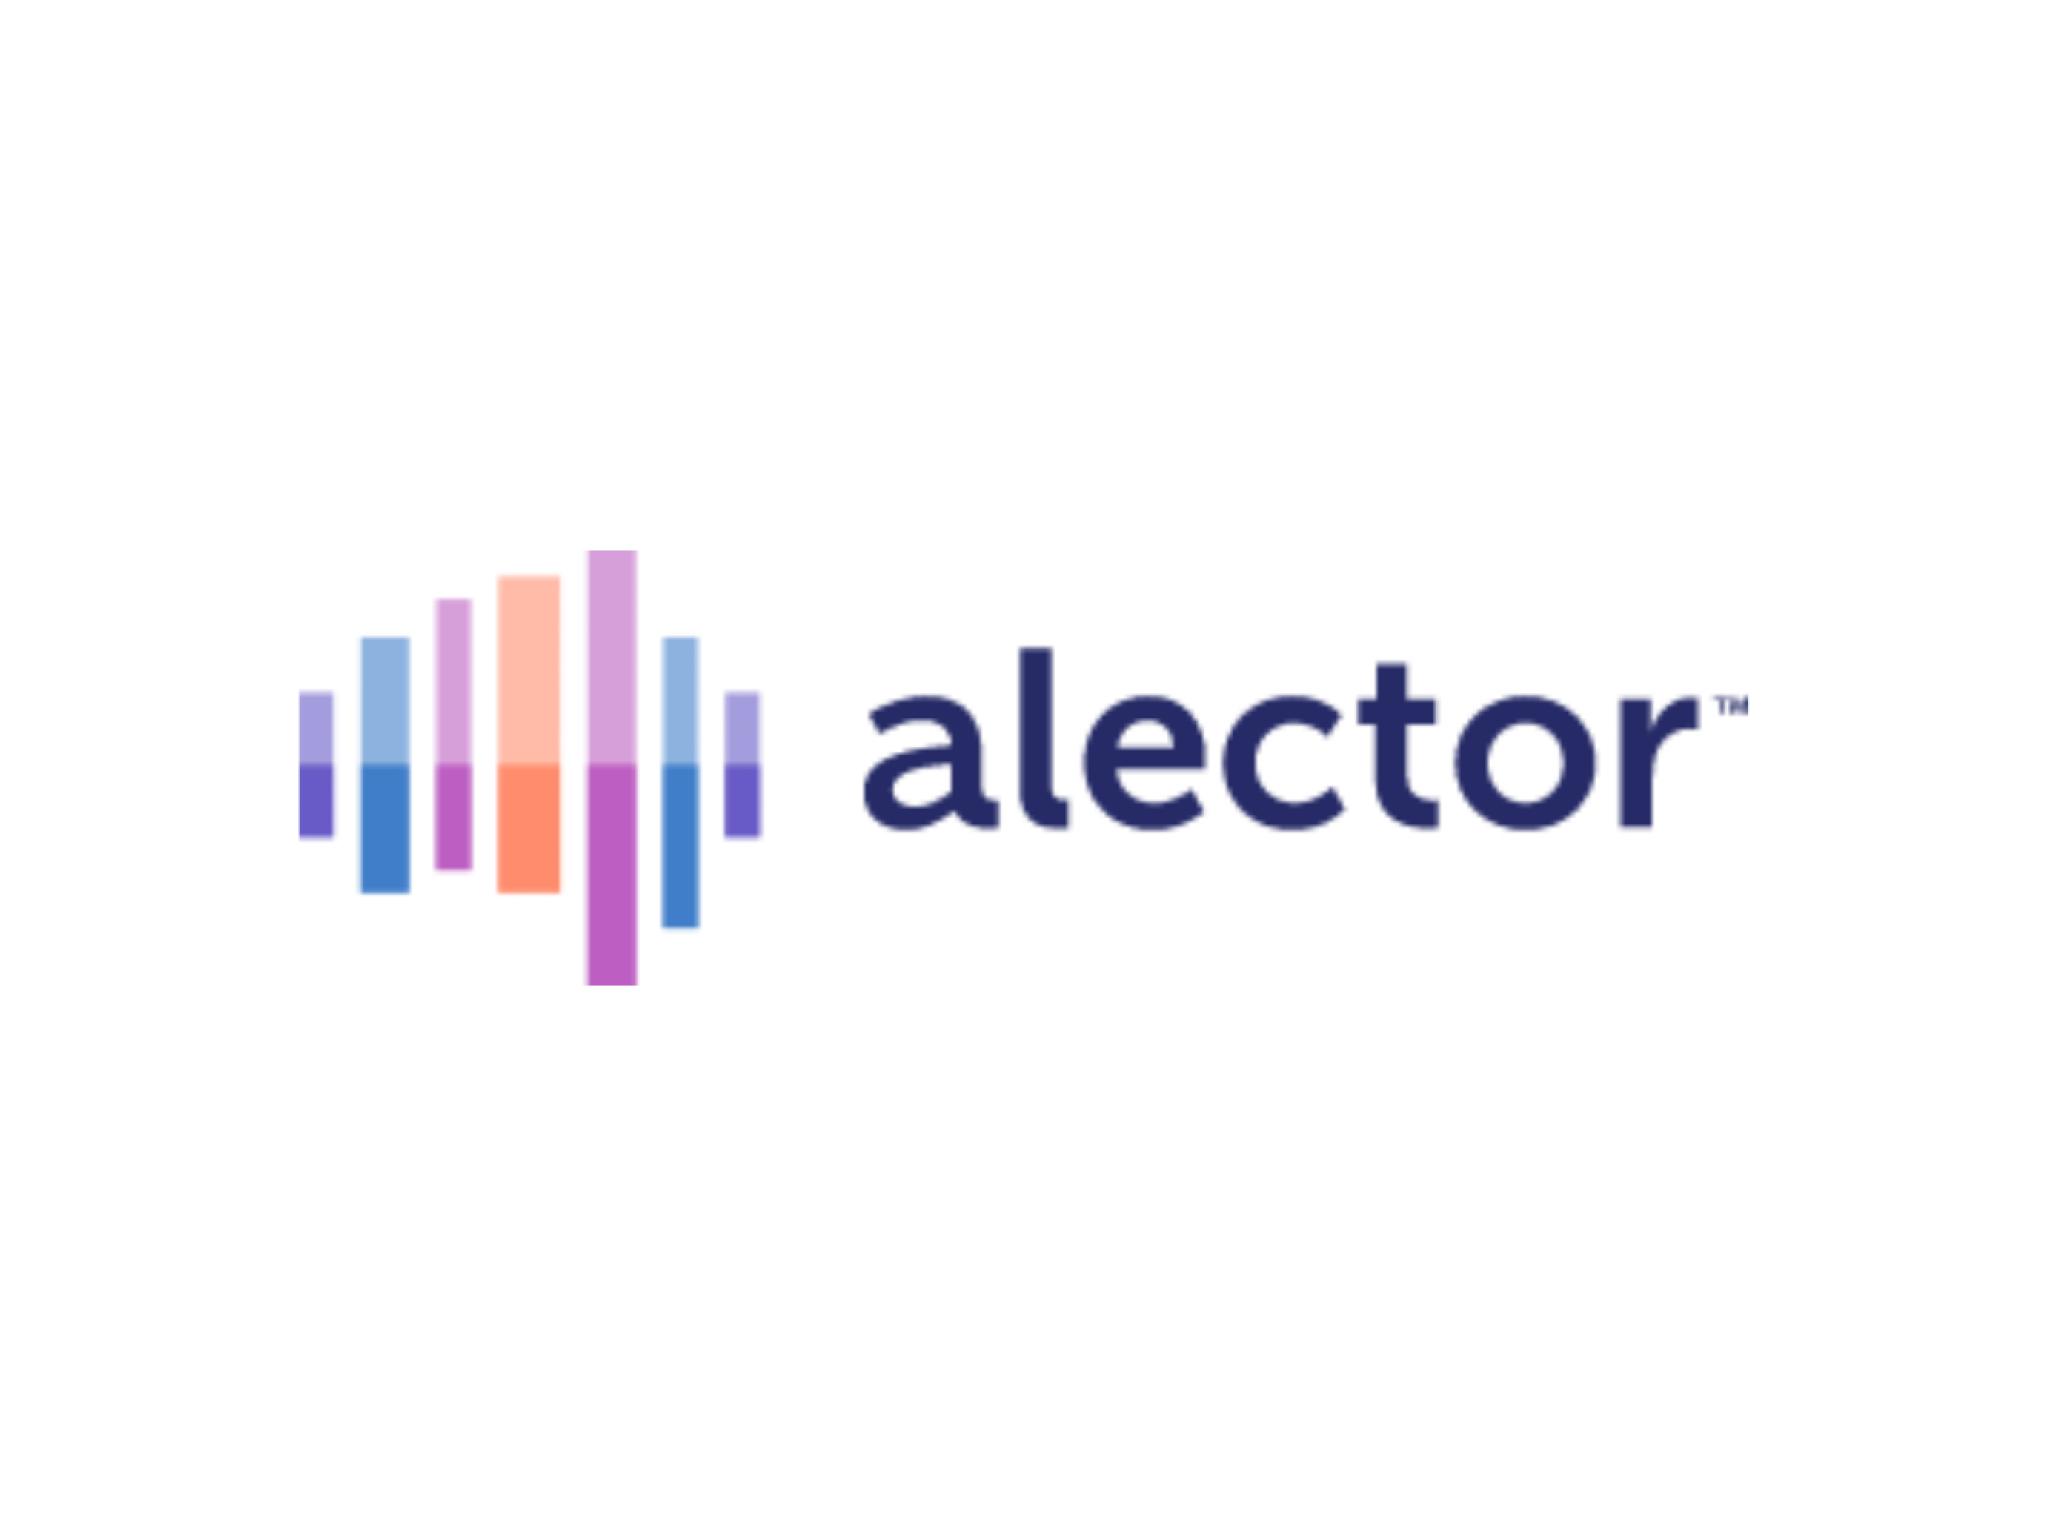  alector-upgraded-analyst-sees-high-reward-potential-ahead-of-alzheimers-disease-candidates-phase-2-results 